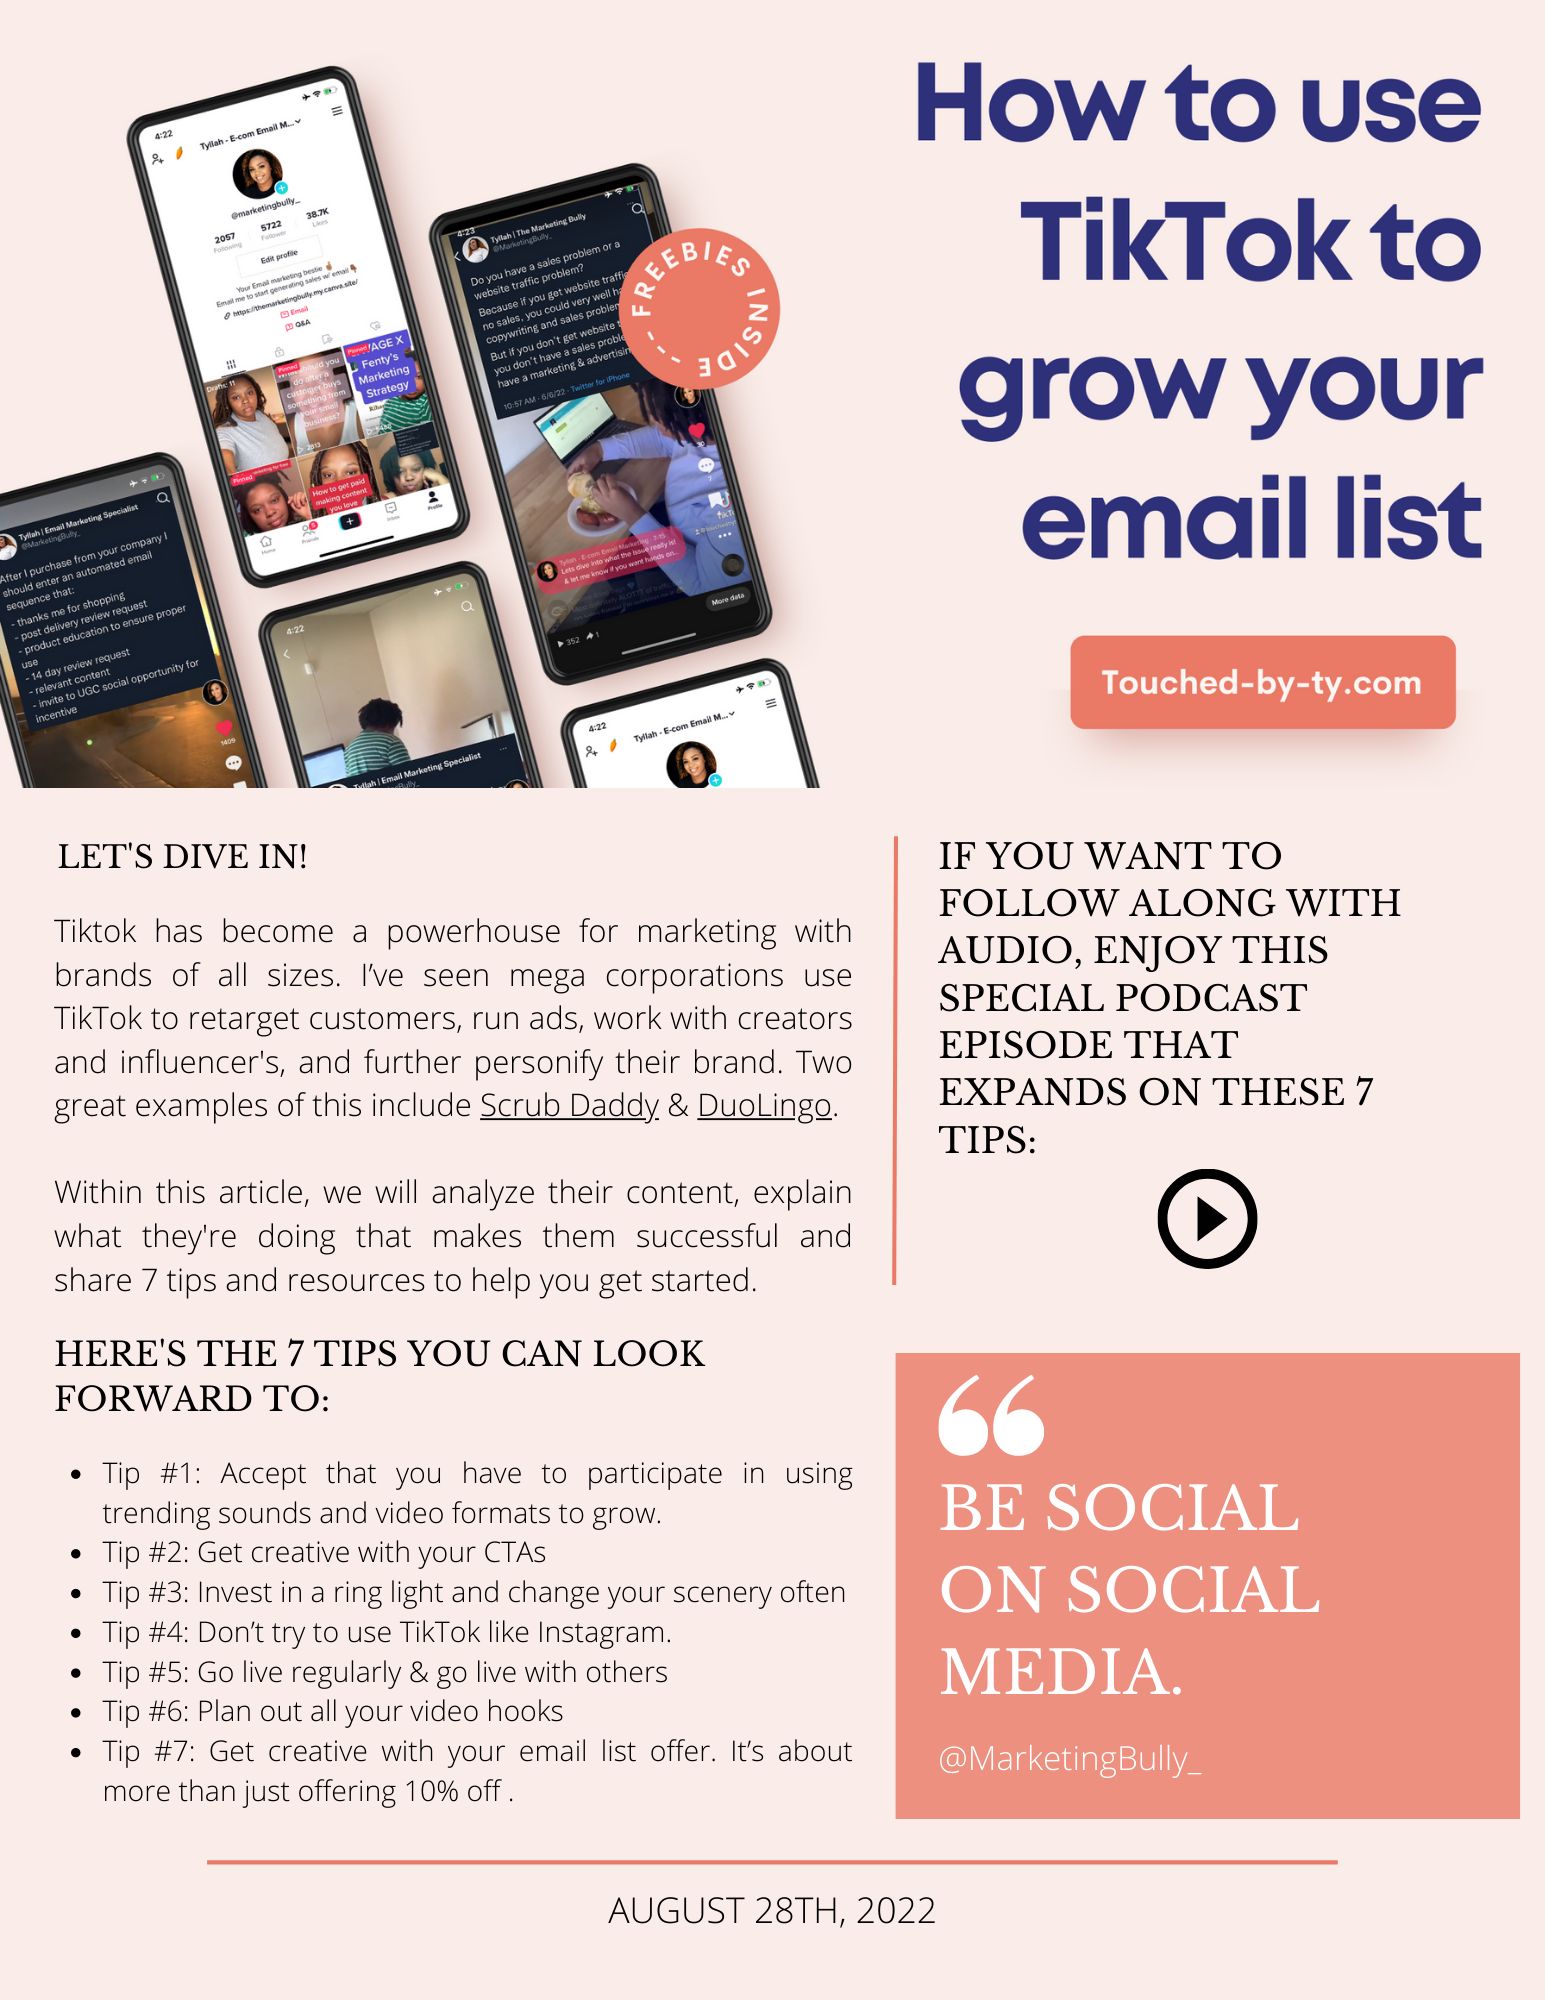 How to grow your email list using TikTok